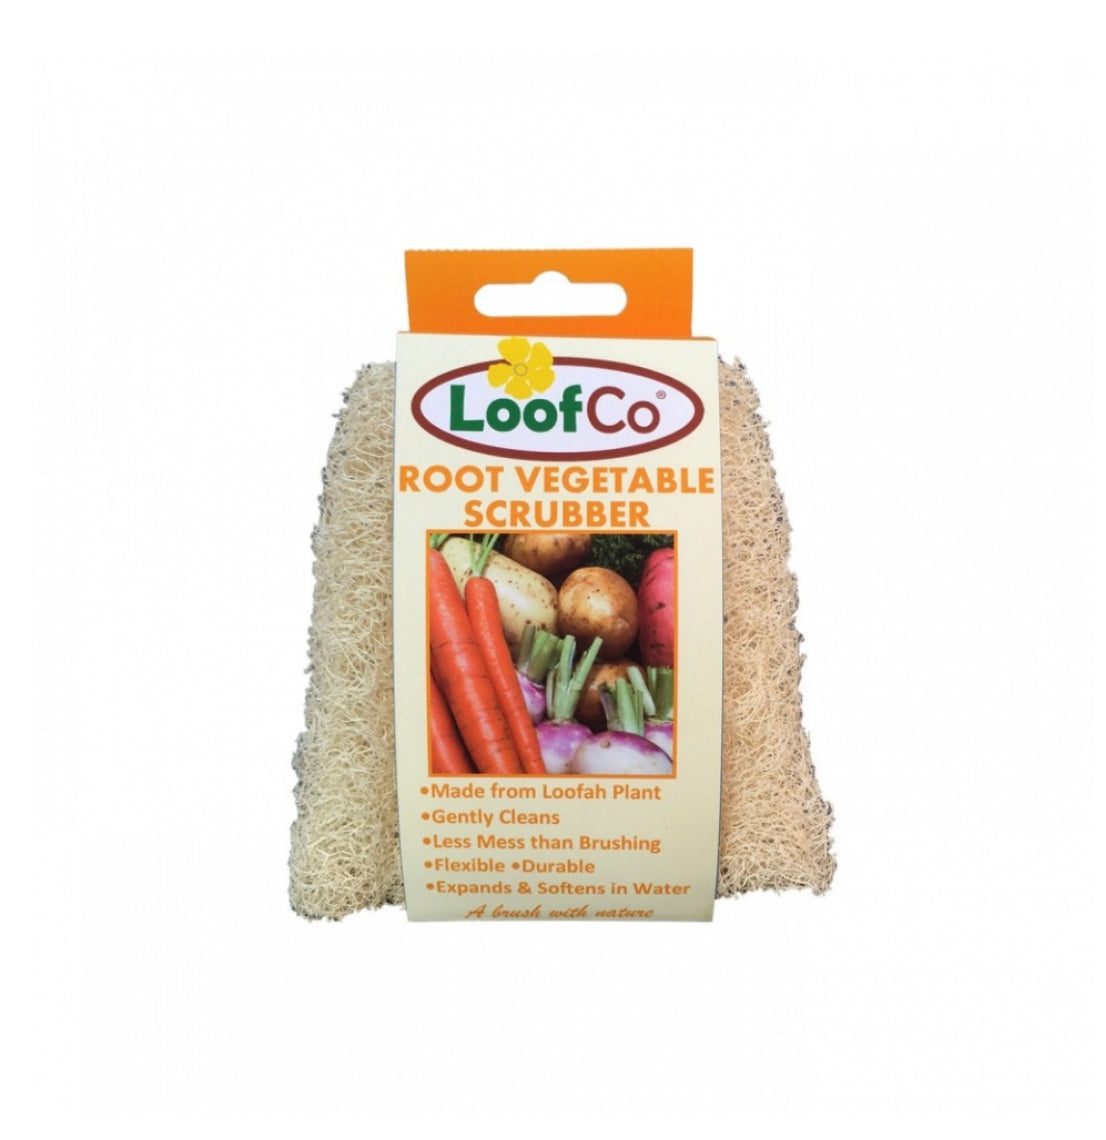 Vegetable Scrubber - LoofCo